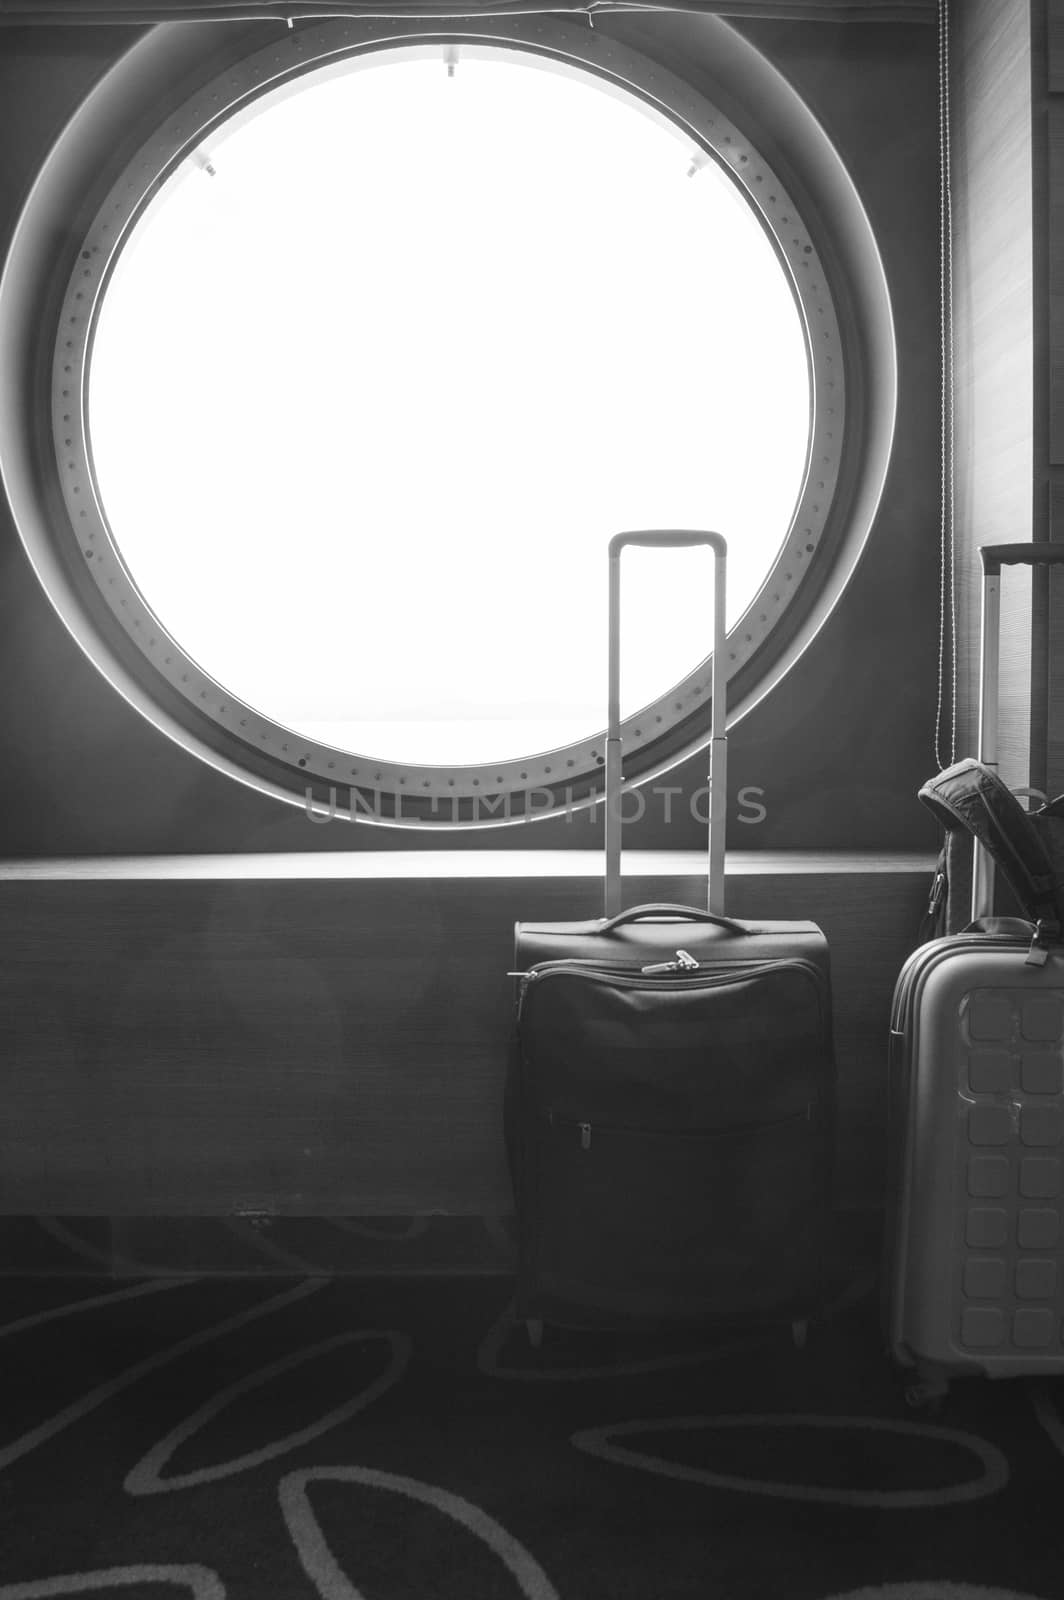 Two suitcases for traveling in front of the round porthole of the ship, the concept of leisure or business trip, vertical shot.